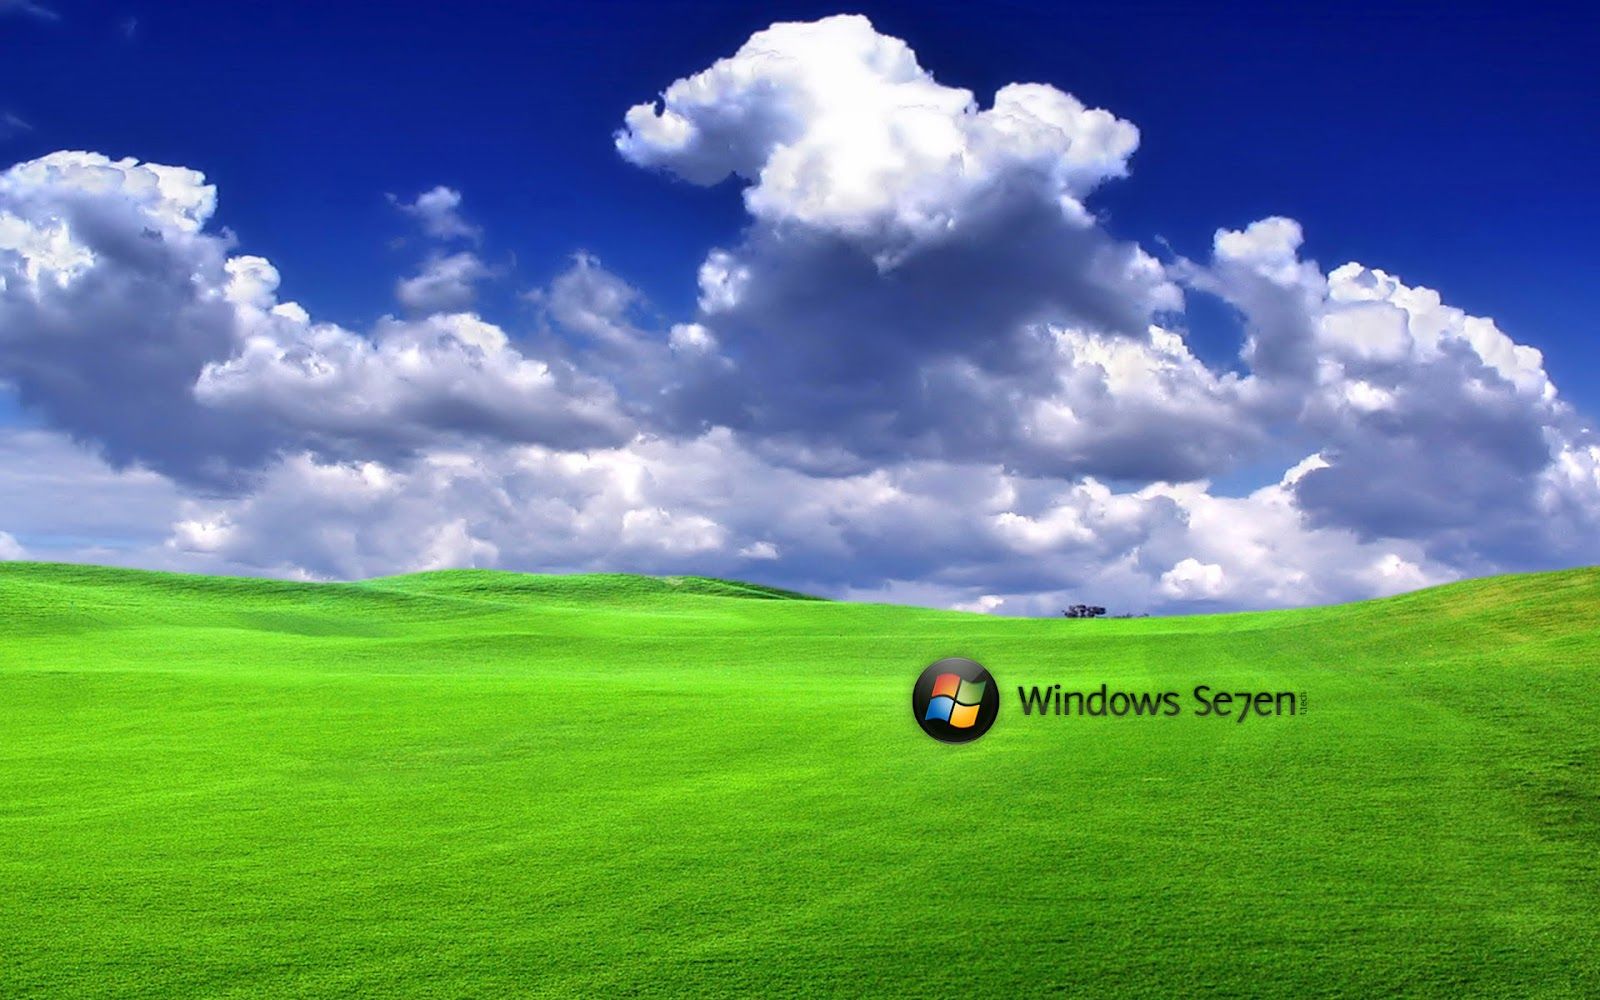 Windows 7 Wallpapers Beautiful Backgrounds for Windows 7 Win 7